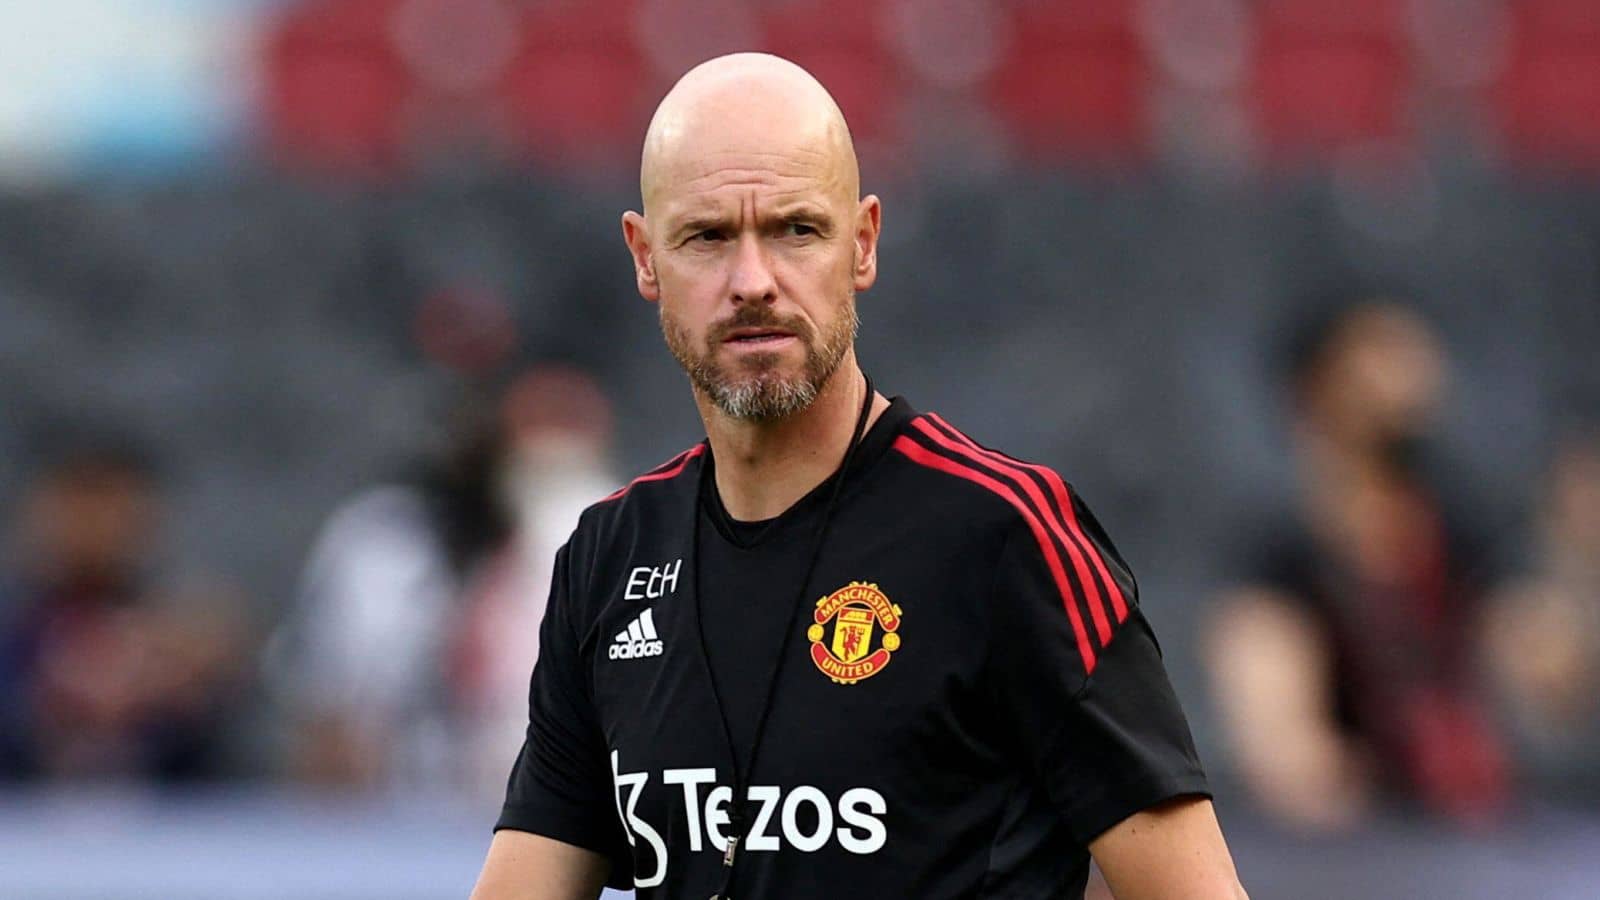 The only way for Erik Ten Hag at Manchester is up